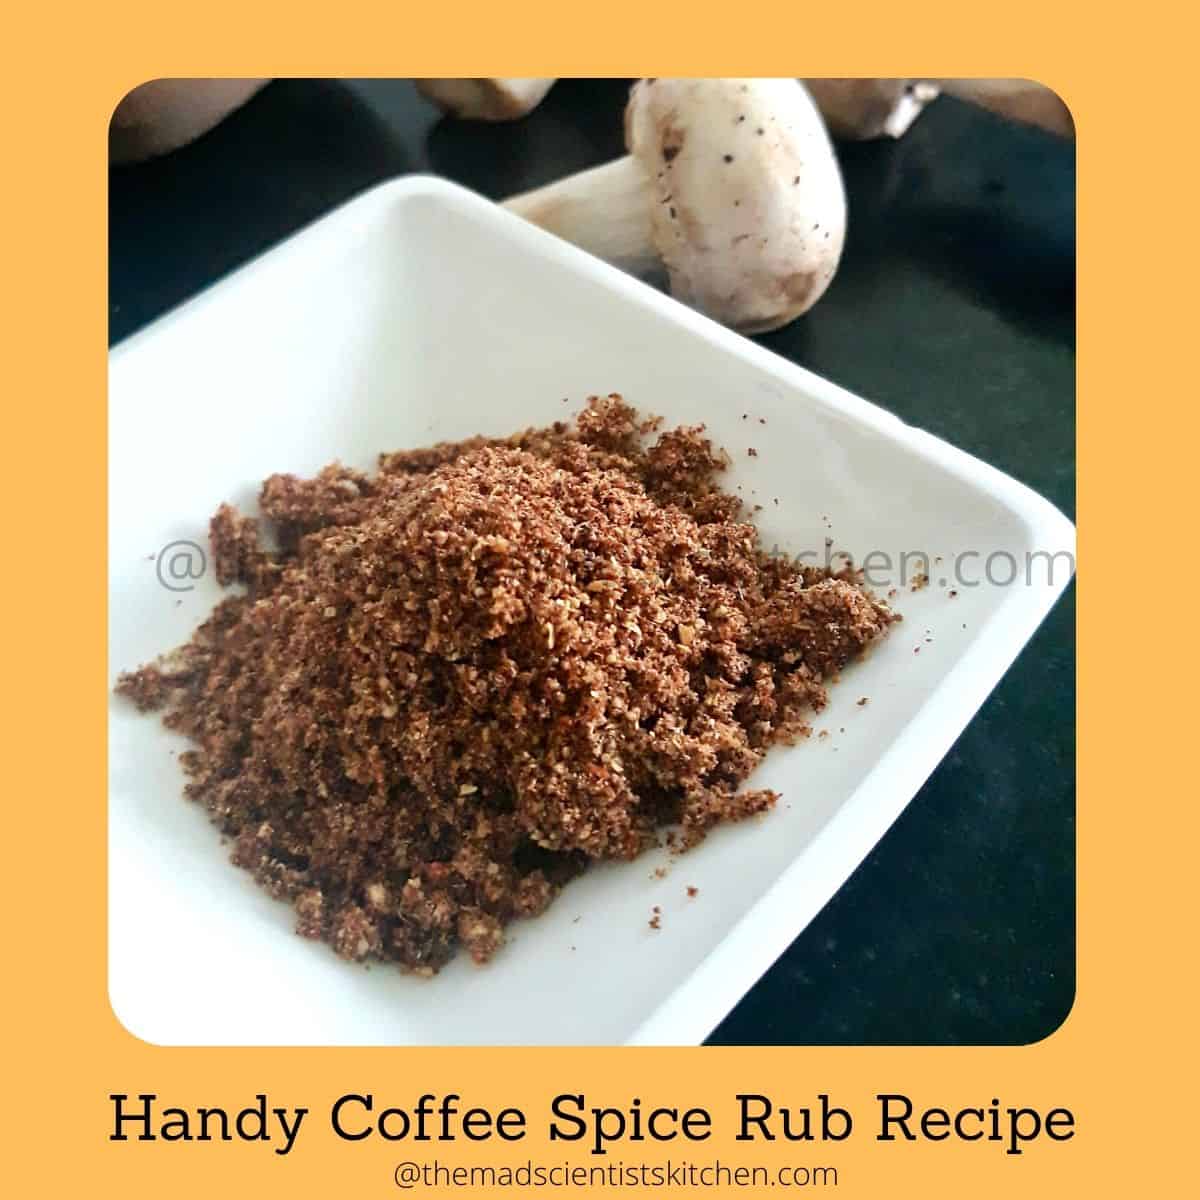 Coffee Spice mix that is extremely delicious. Try it!